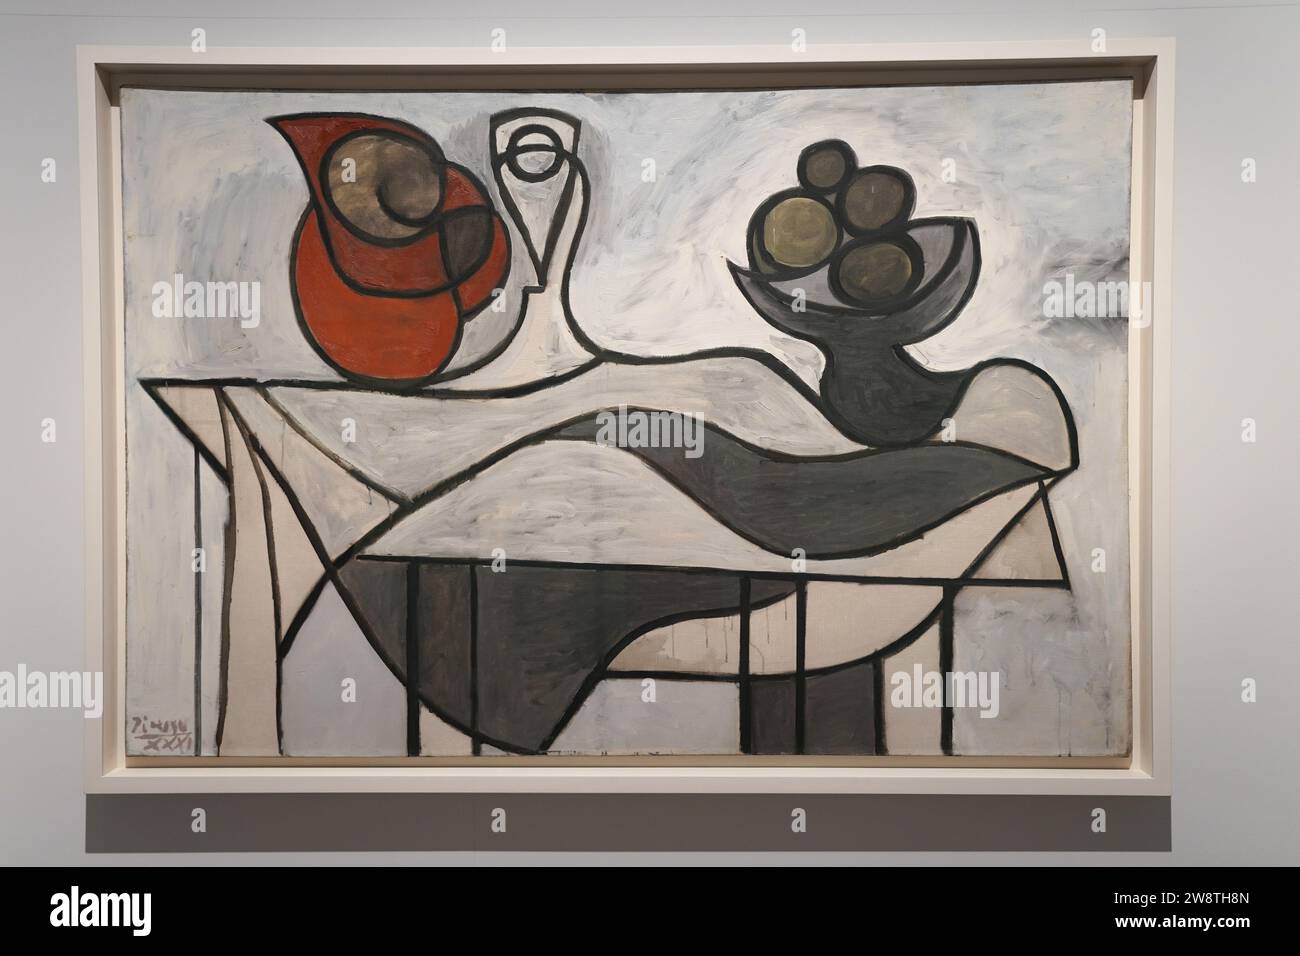 https://c8.alamy.com/comp/2W8TH8N/pitcher-and-fruit-bowl-1931-pablo-picasso-museum-in-barcelona-spain-2W8TH8N.jpg